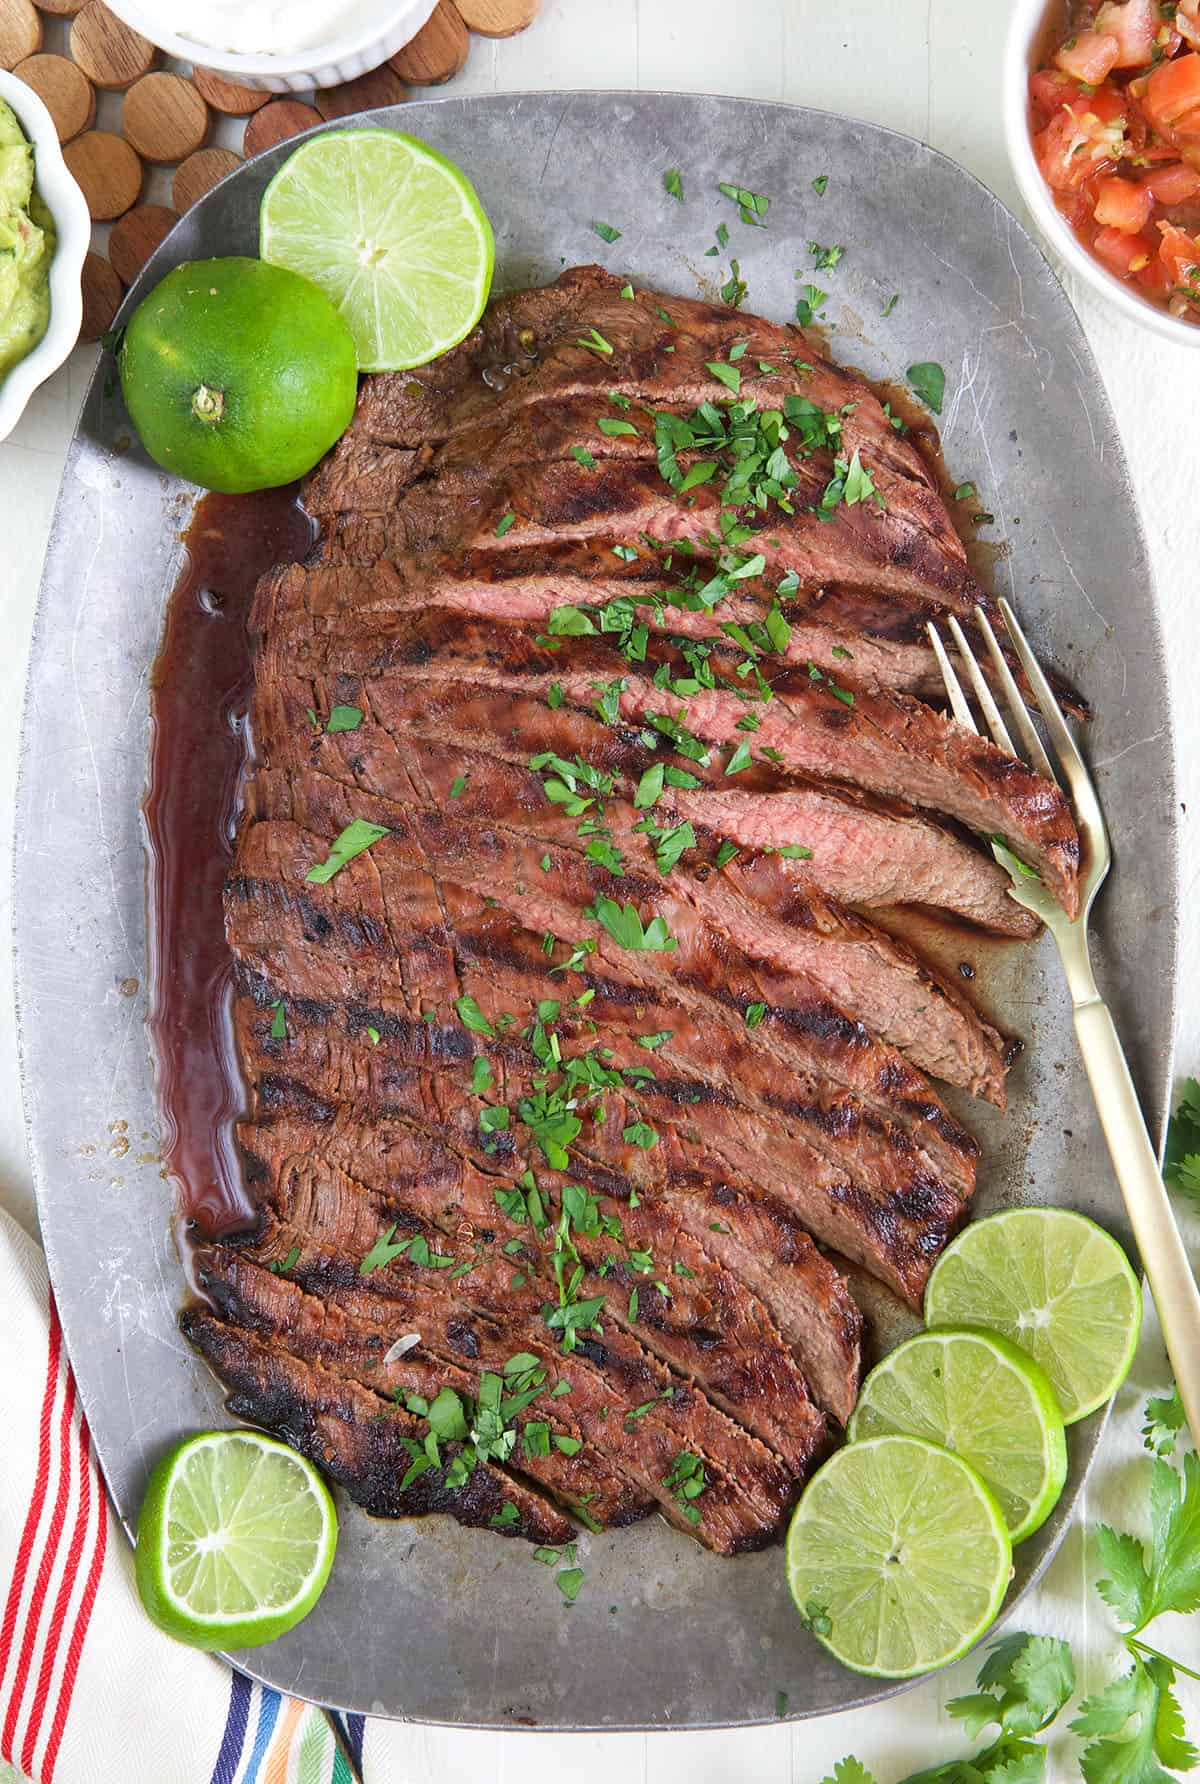 Carne asada has been sliced and is served on a gray serving platter with cilantro and limes.